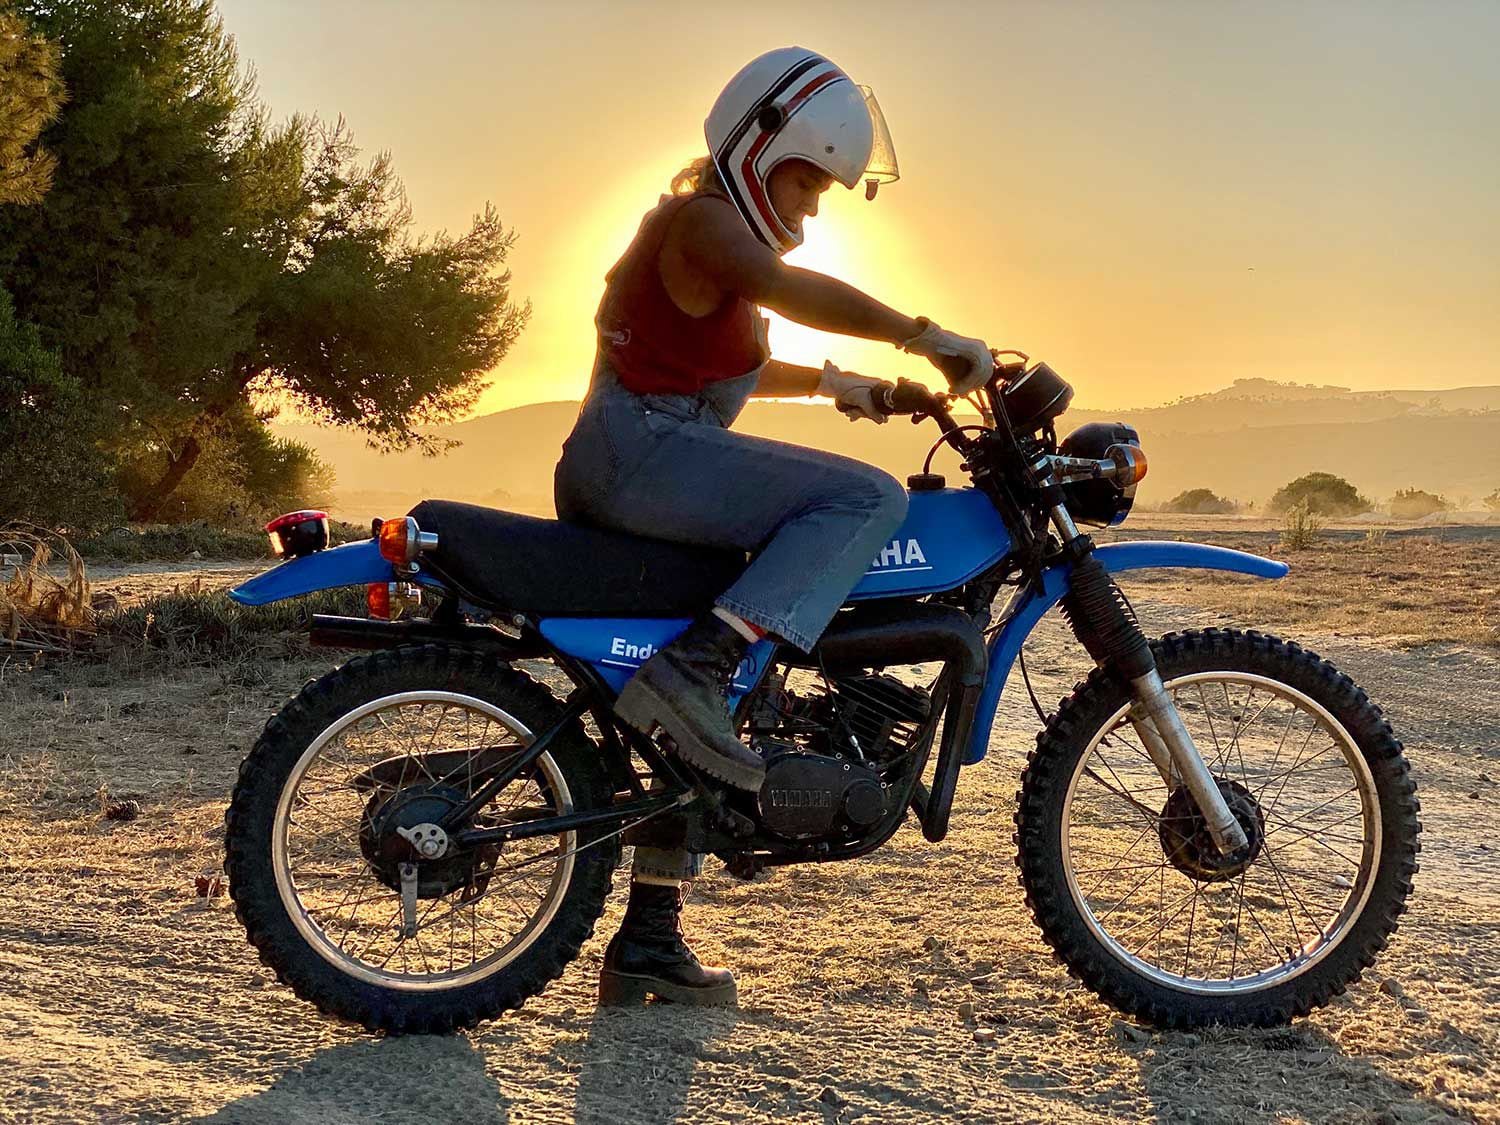 When riding into the sunset, with the darkness creeping behind you, the instinct to survive, knowledge of navigation, and creative imagination will show you the way.